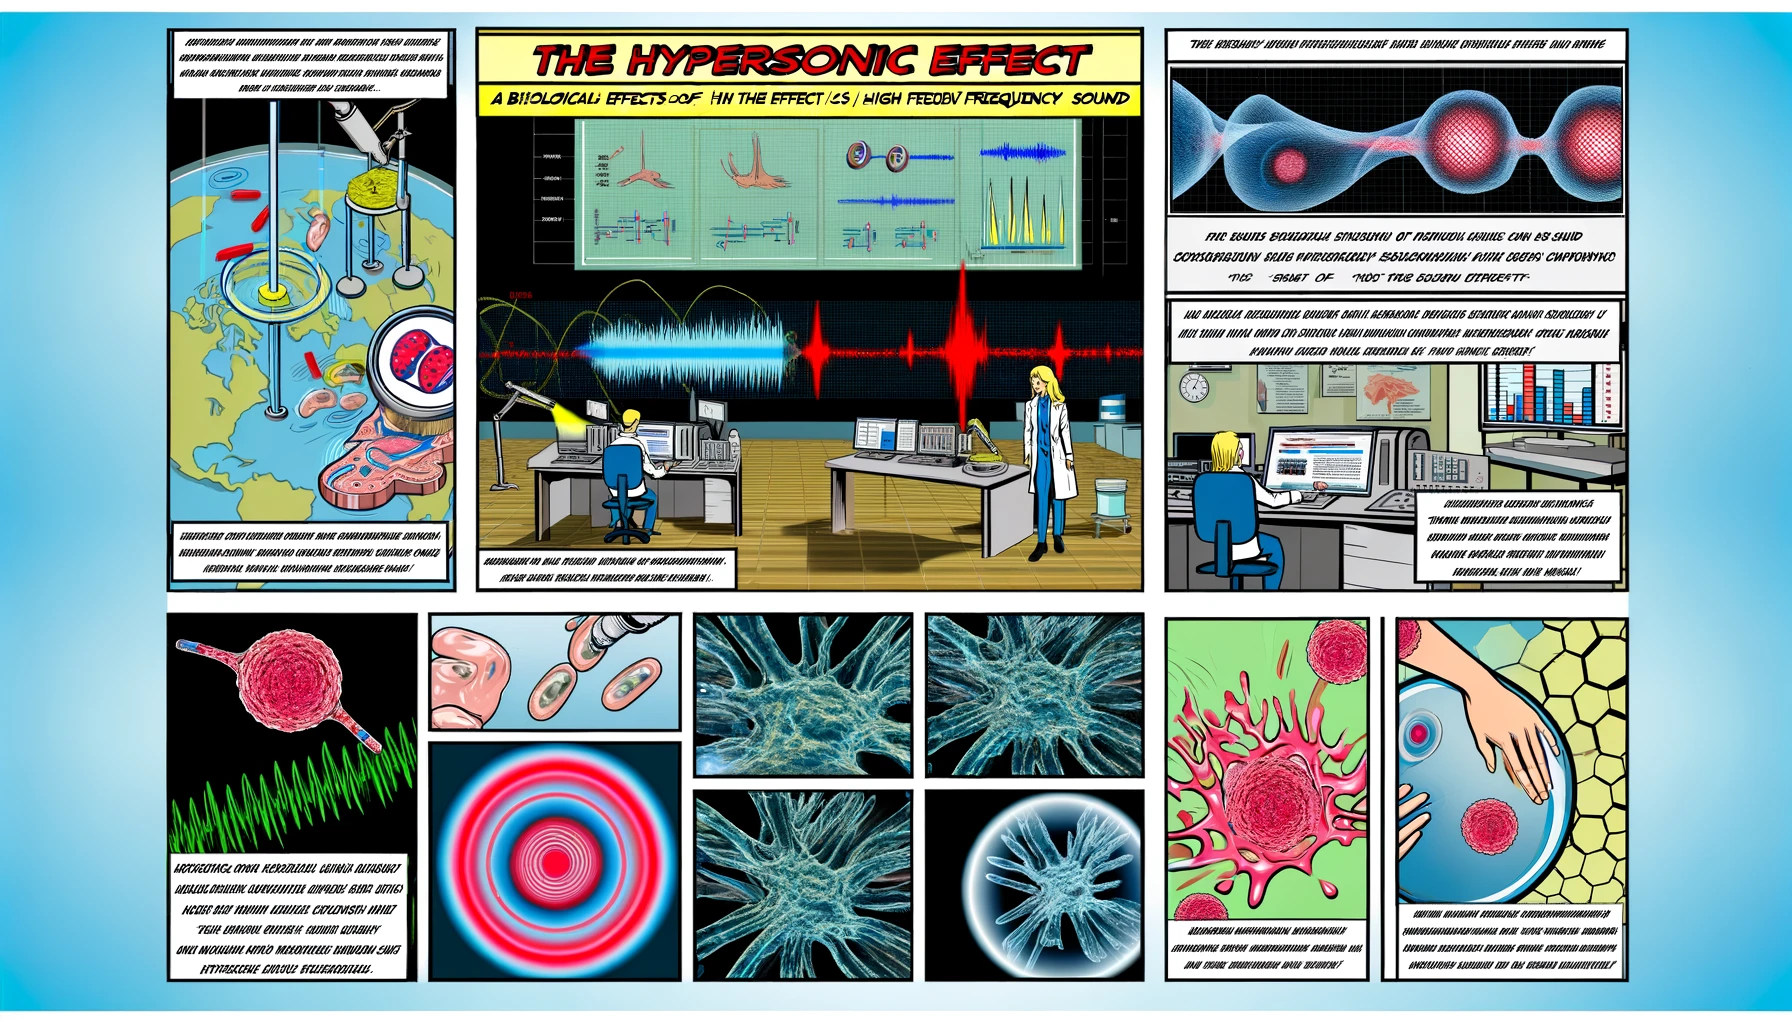 DALL·E 2024 06 10 15.23.35 A comic book style image illustrating the biological effects of high frequency sound focusing on the hypersonic effect. The central scene shows a lab